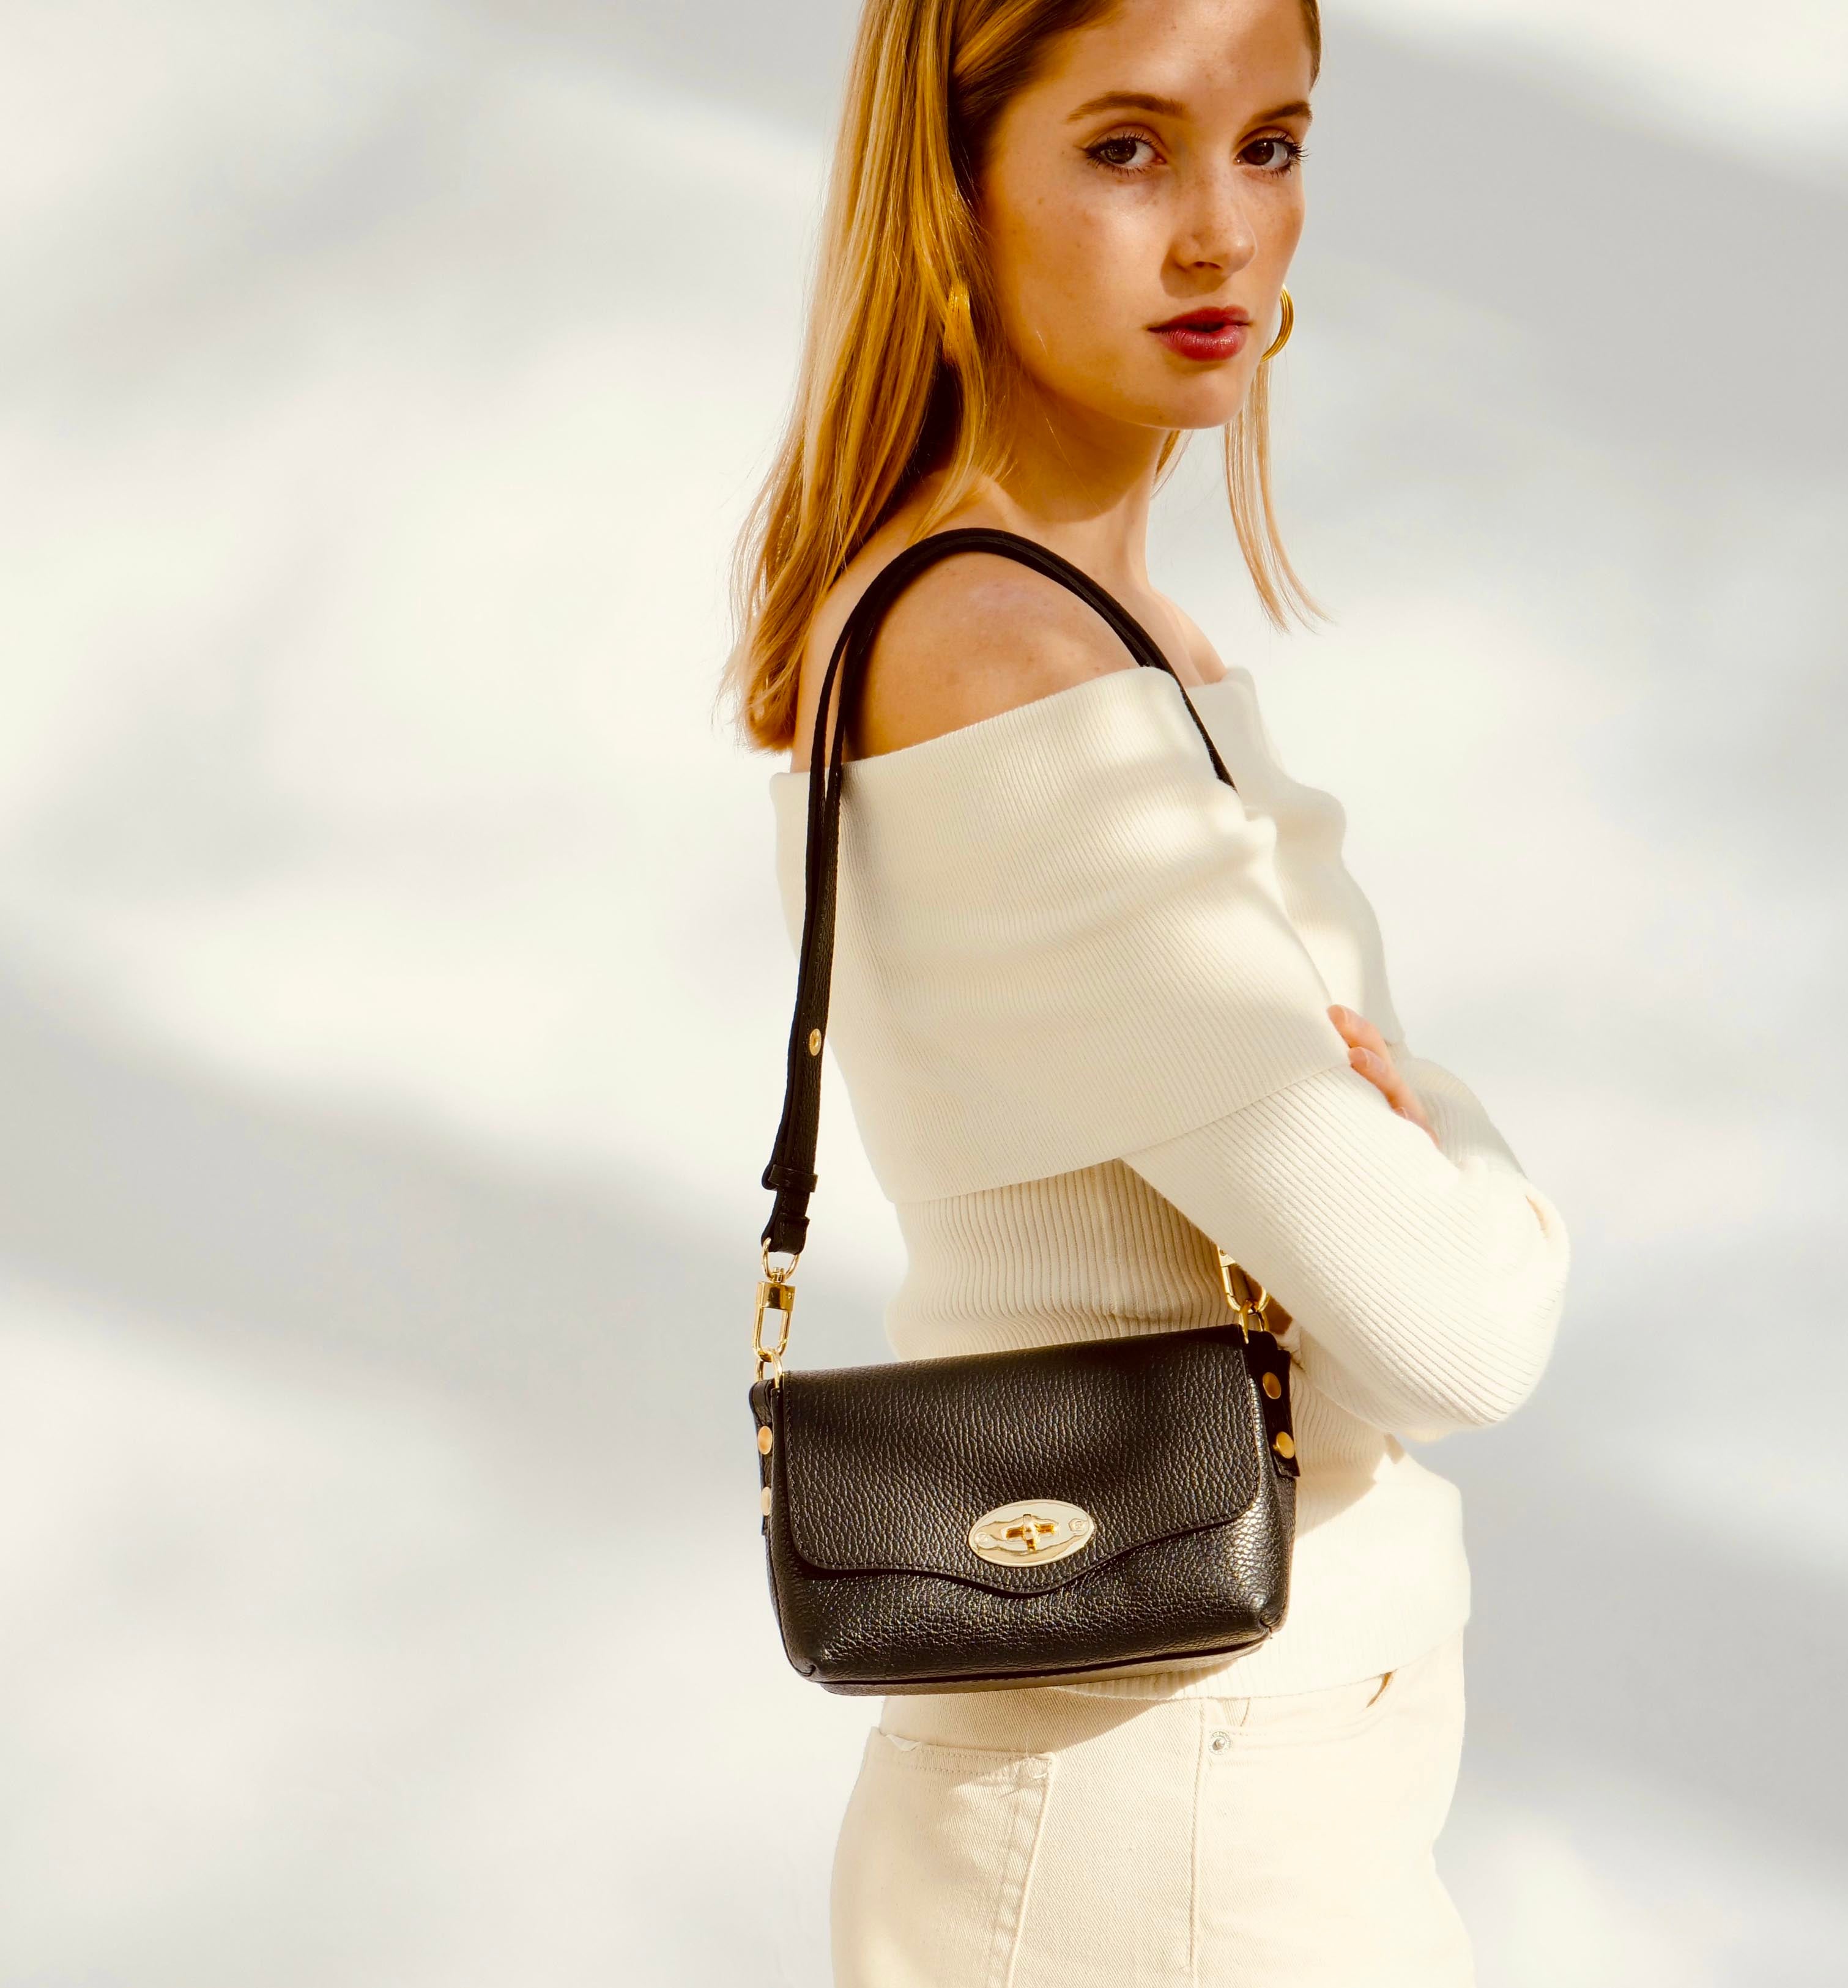 The Maddie Black Leather Bag